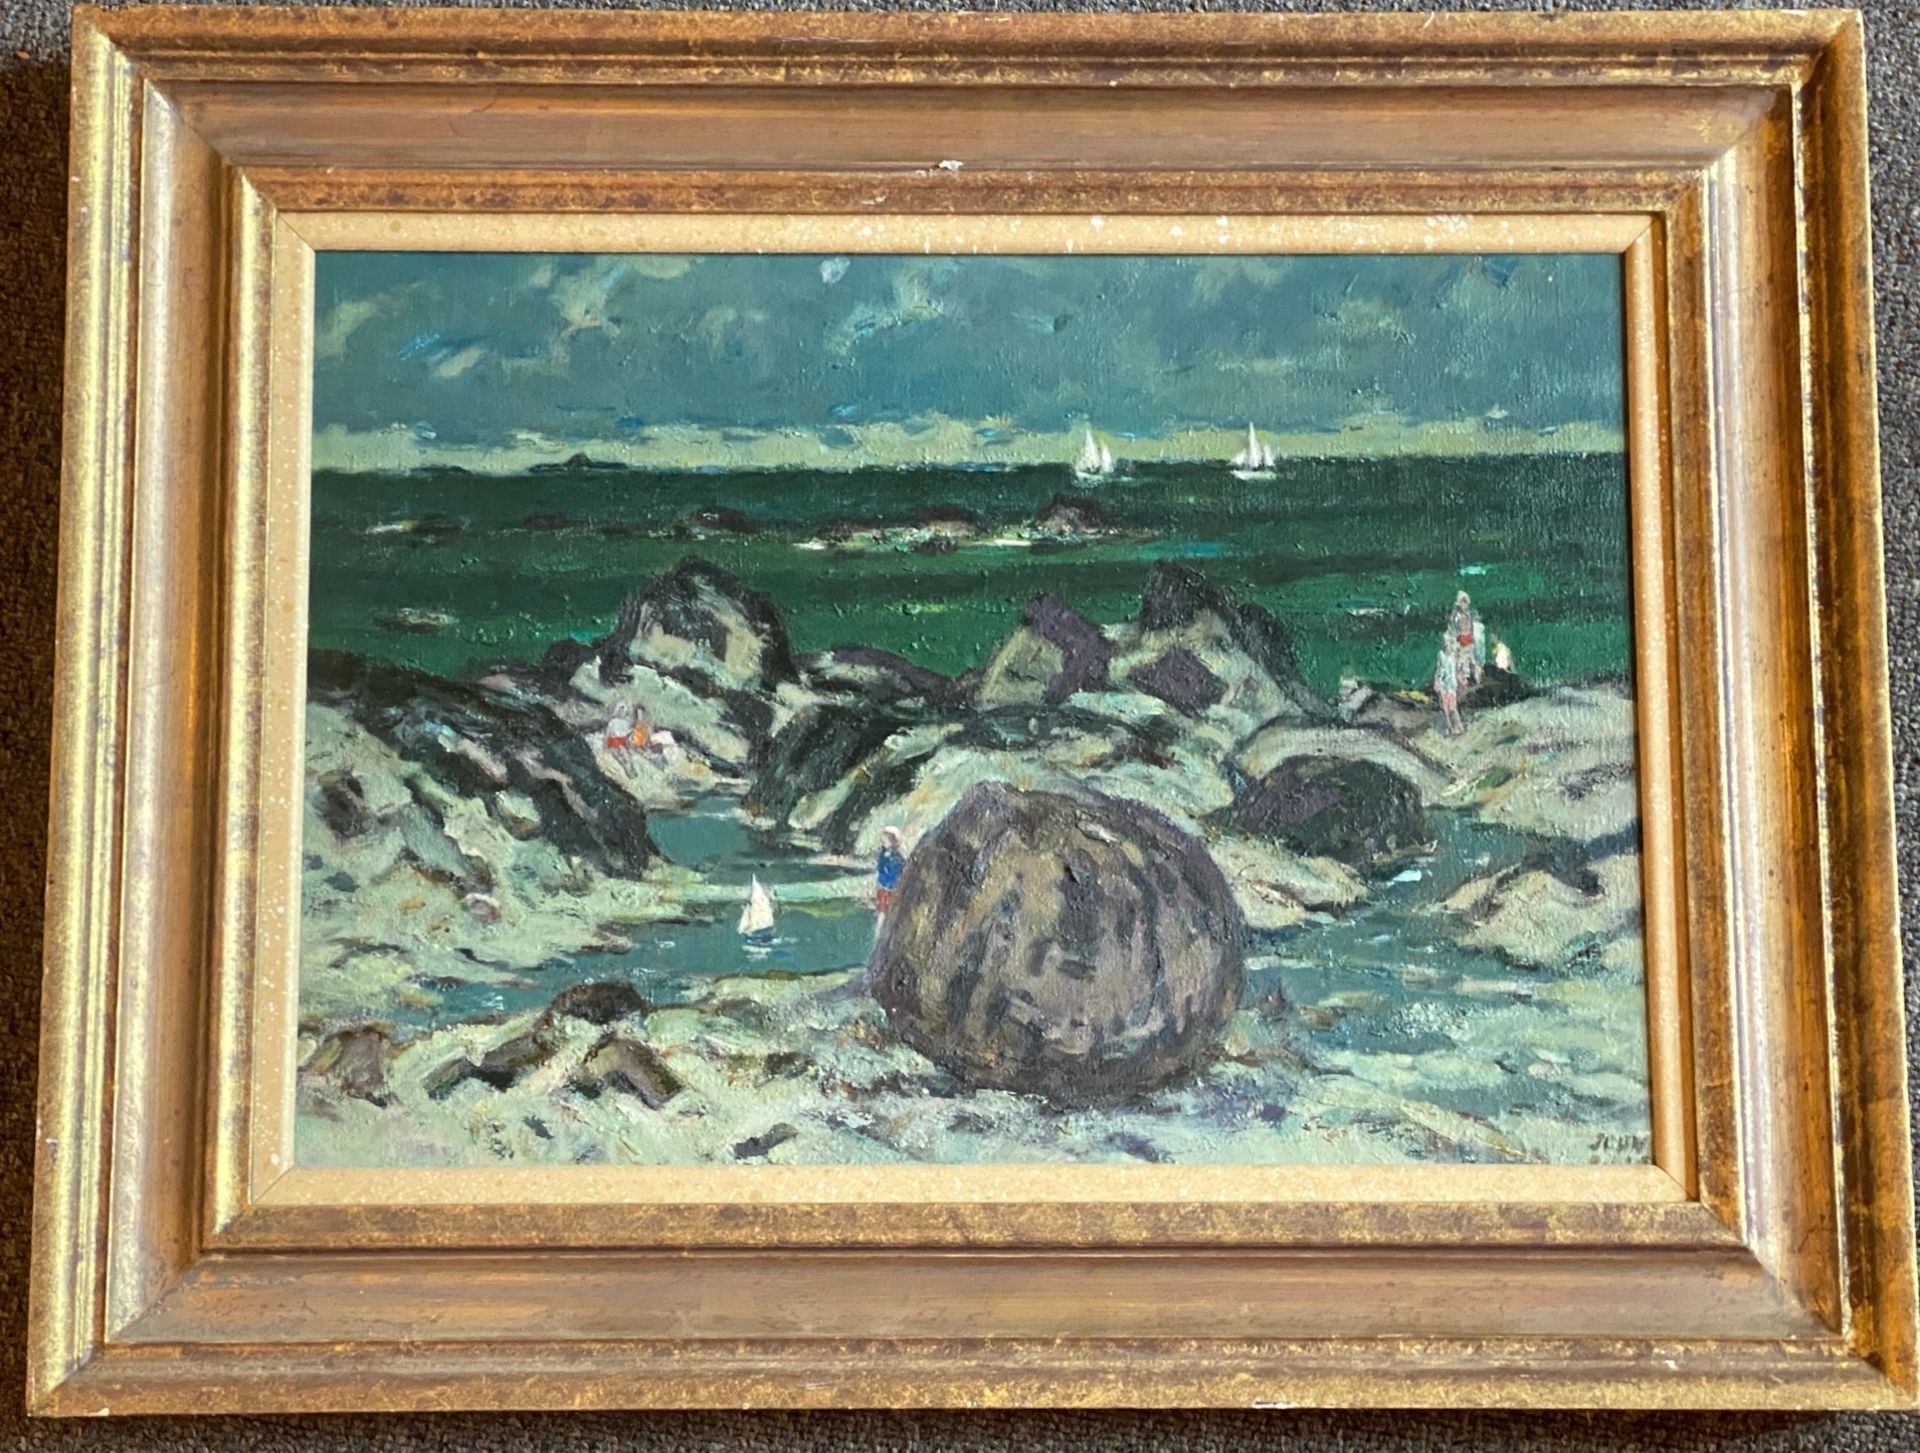 Black Rock, Iona, oil painting by John Miller 1893-1975, Exhibited, P.R.S.W, R.S.A - Image 2 of 4